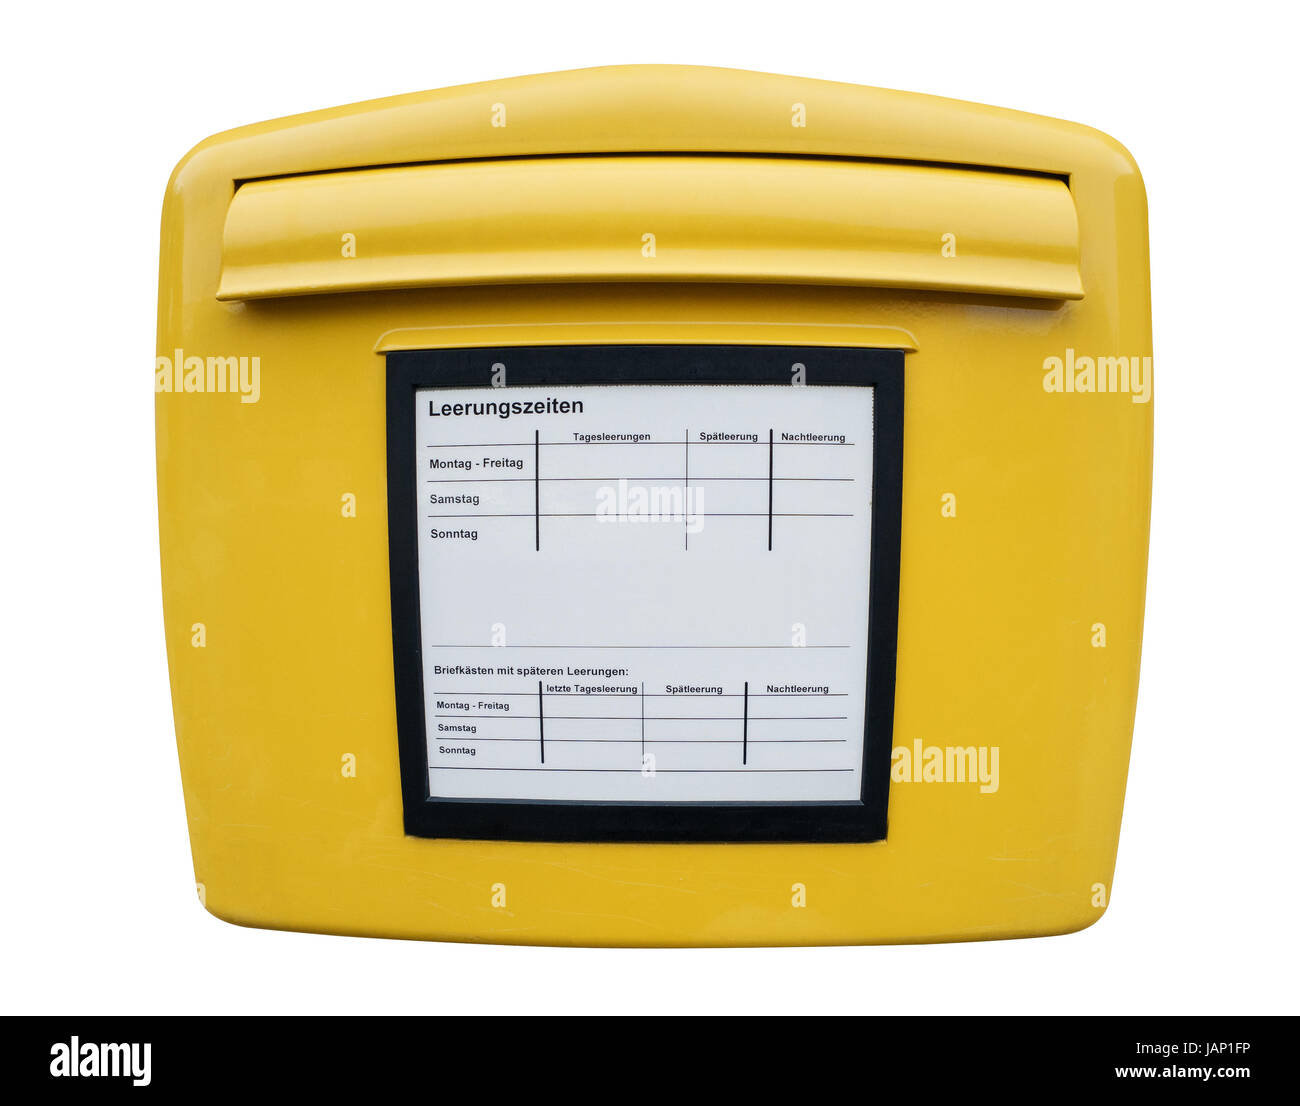 Yellow German Mailbox High Resolution Stock Photography and Images - Alamy